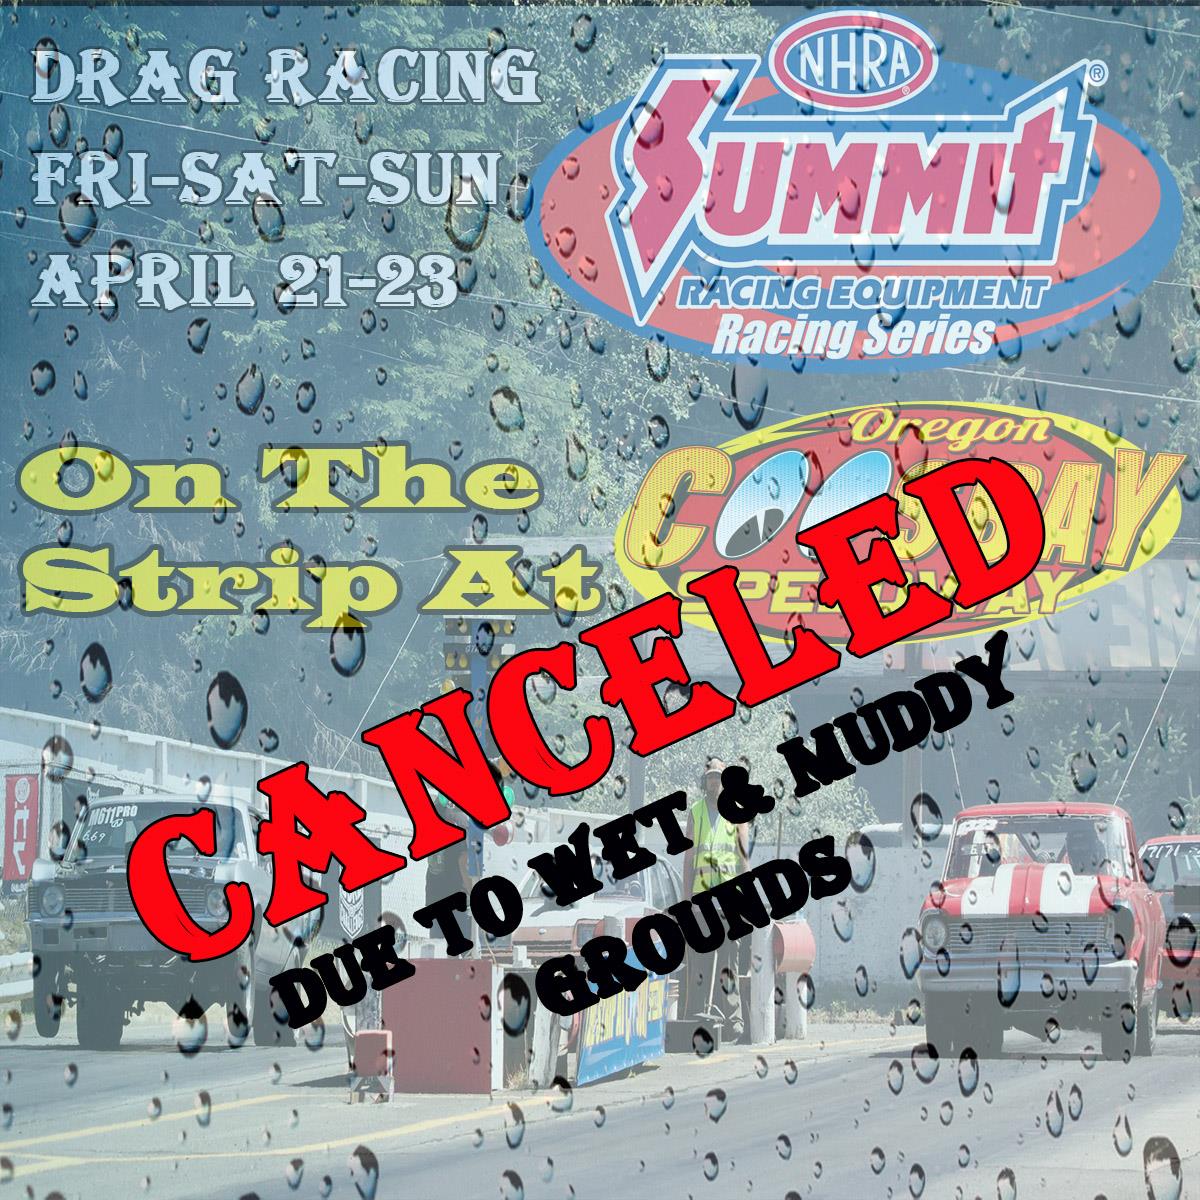 Drag Racing Weekend Canceled Due to Wet &amp; Muddy Grounds